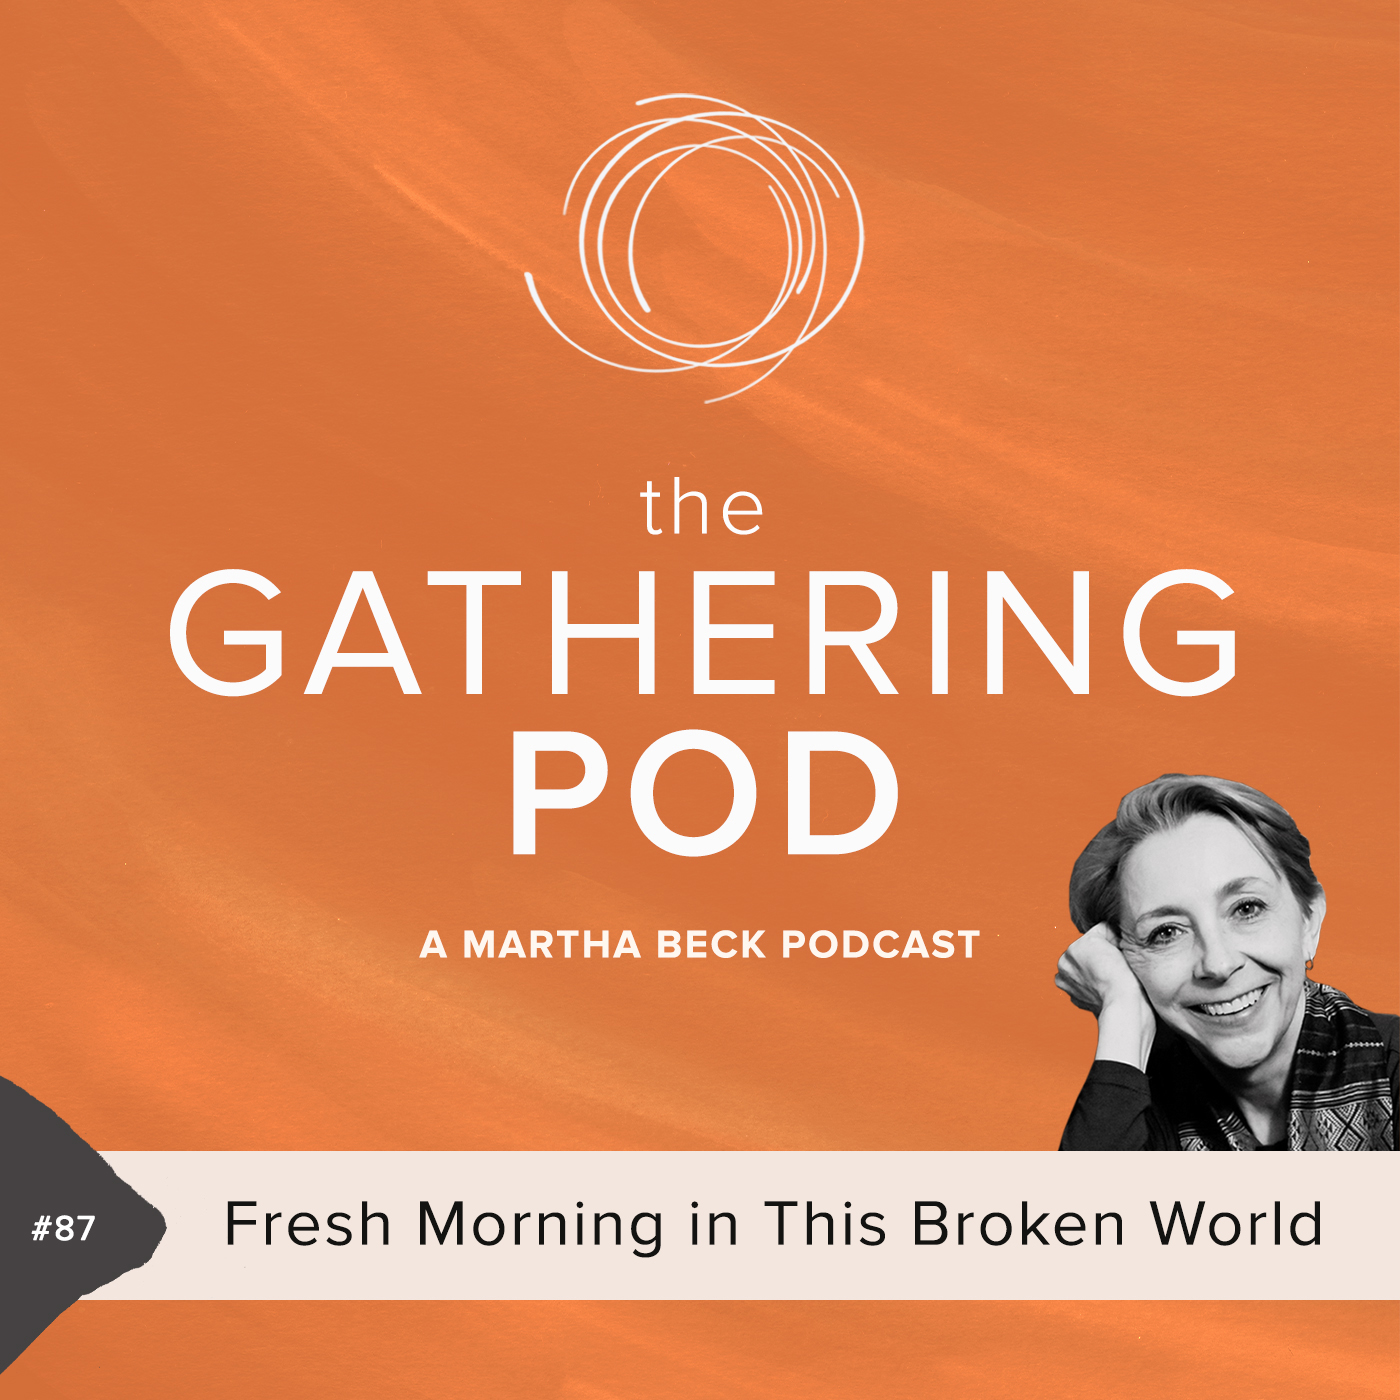 Image for The Gathering Pod A Martha Beck Podcast Episode #87 Fresh Morning in This Broken World